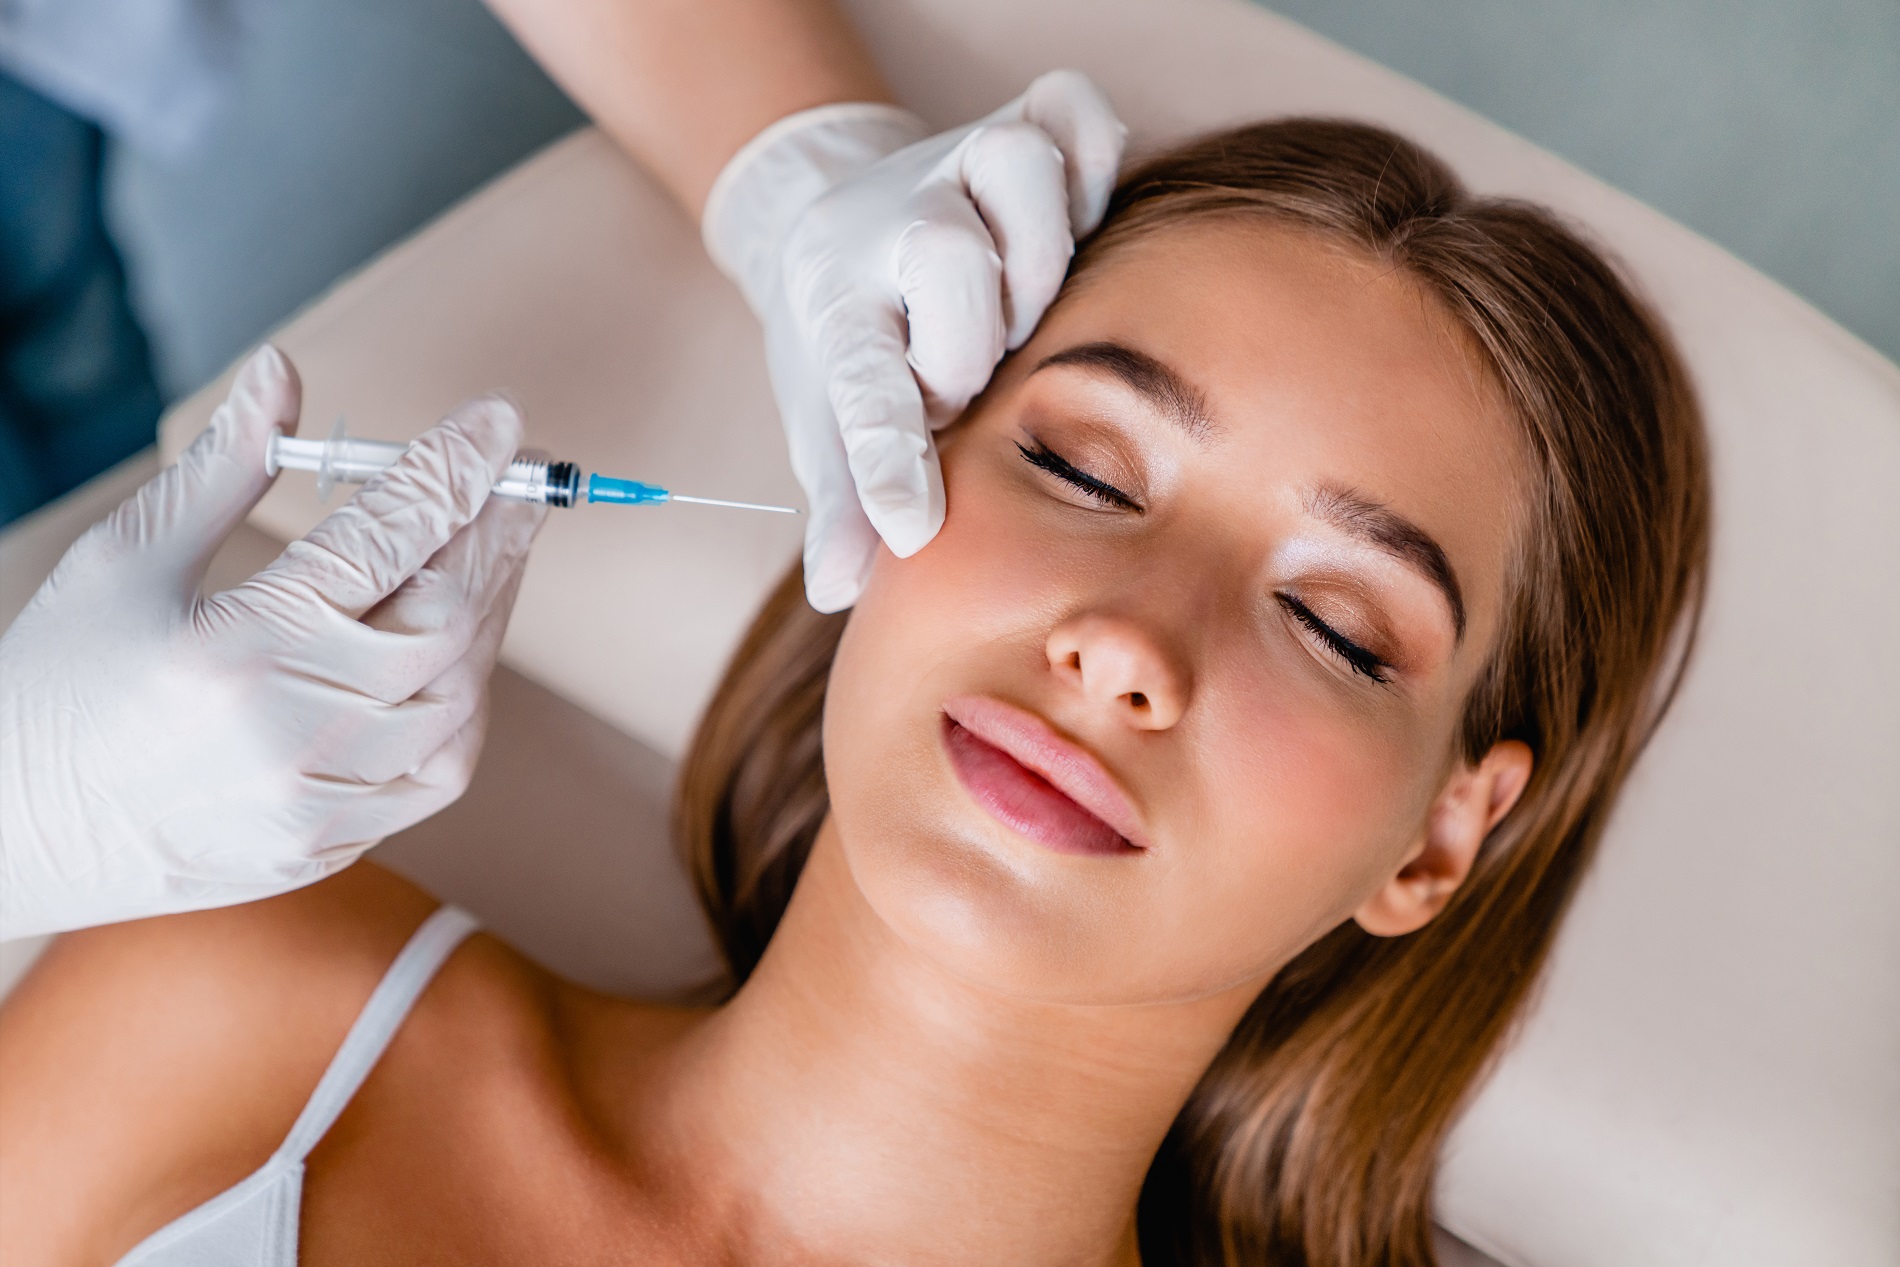 Young woman gets beauty facial injections in salon | Soleill Medical & Beauty Spa in Portland, OR